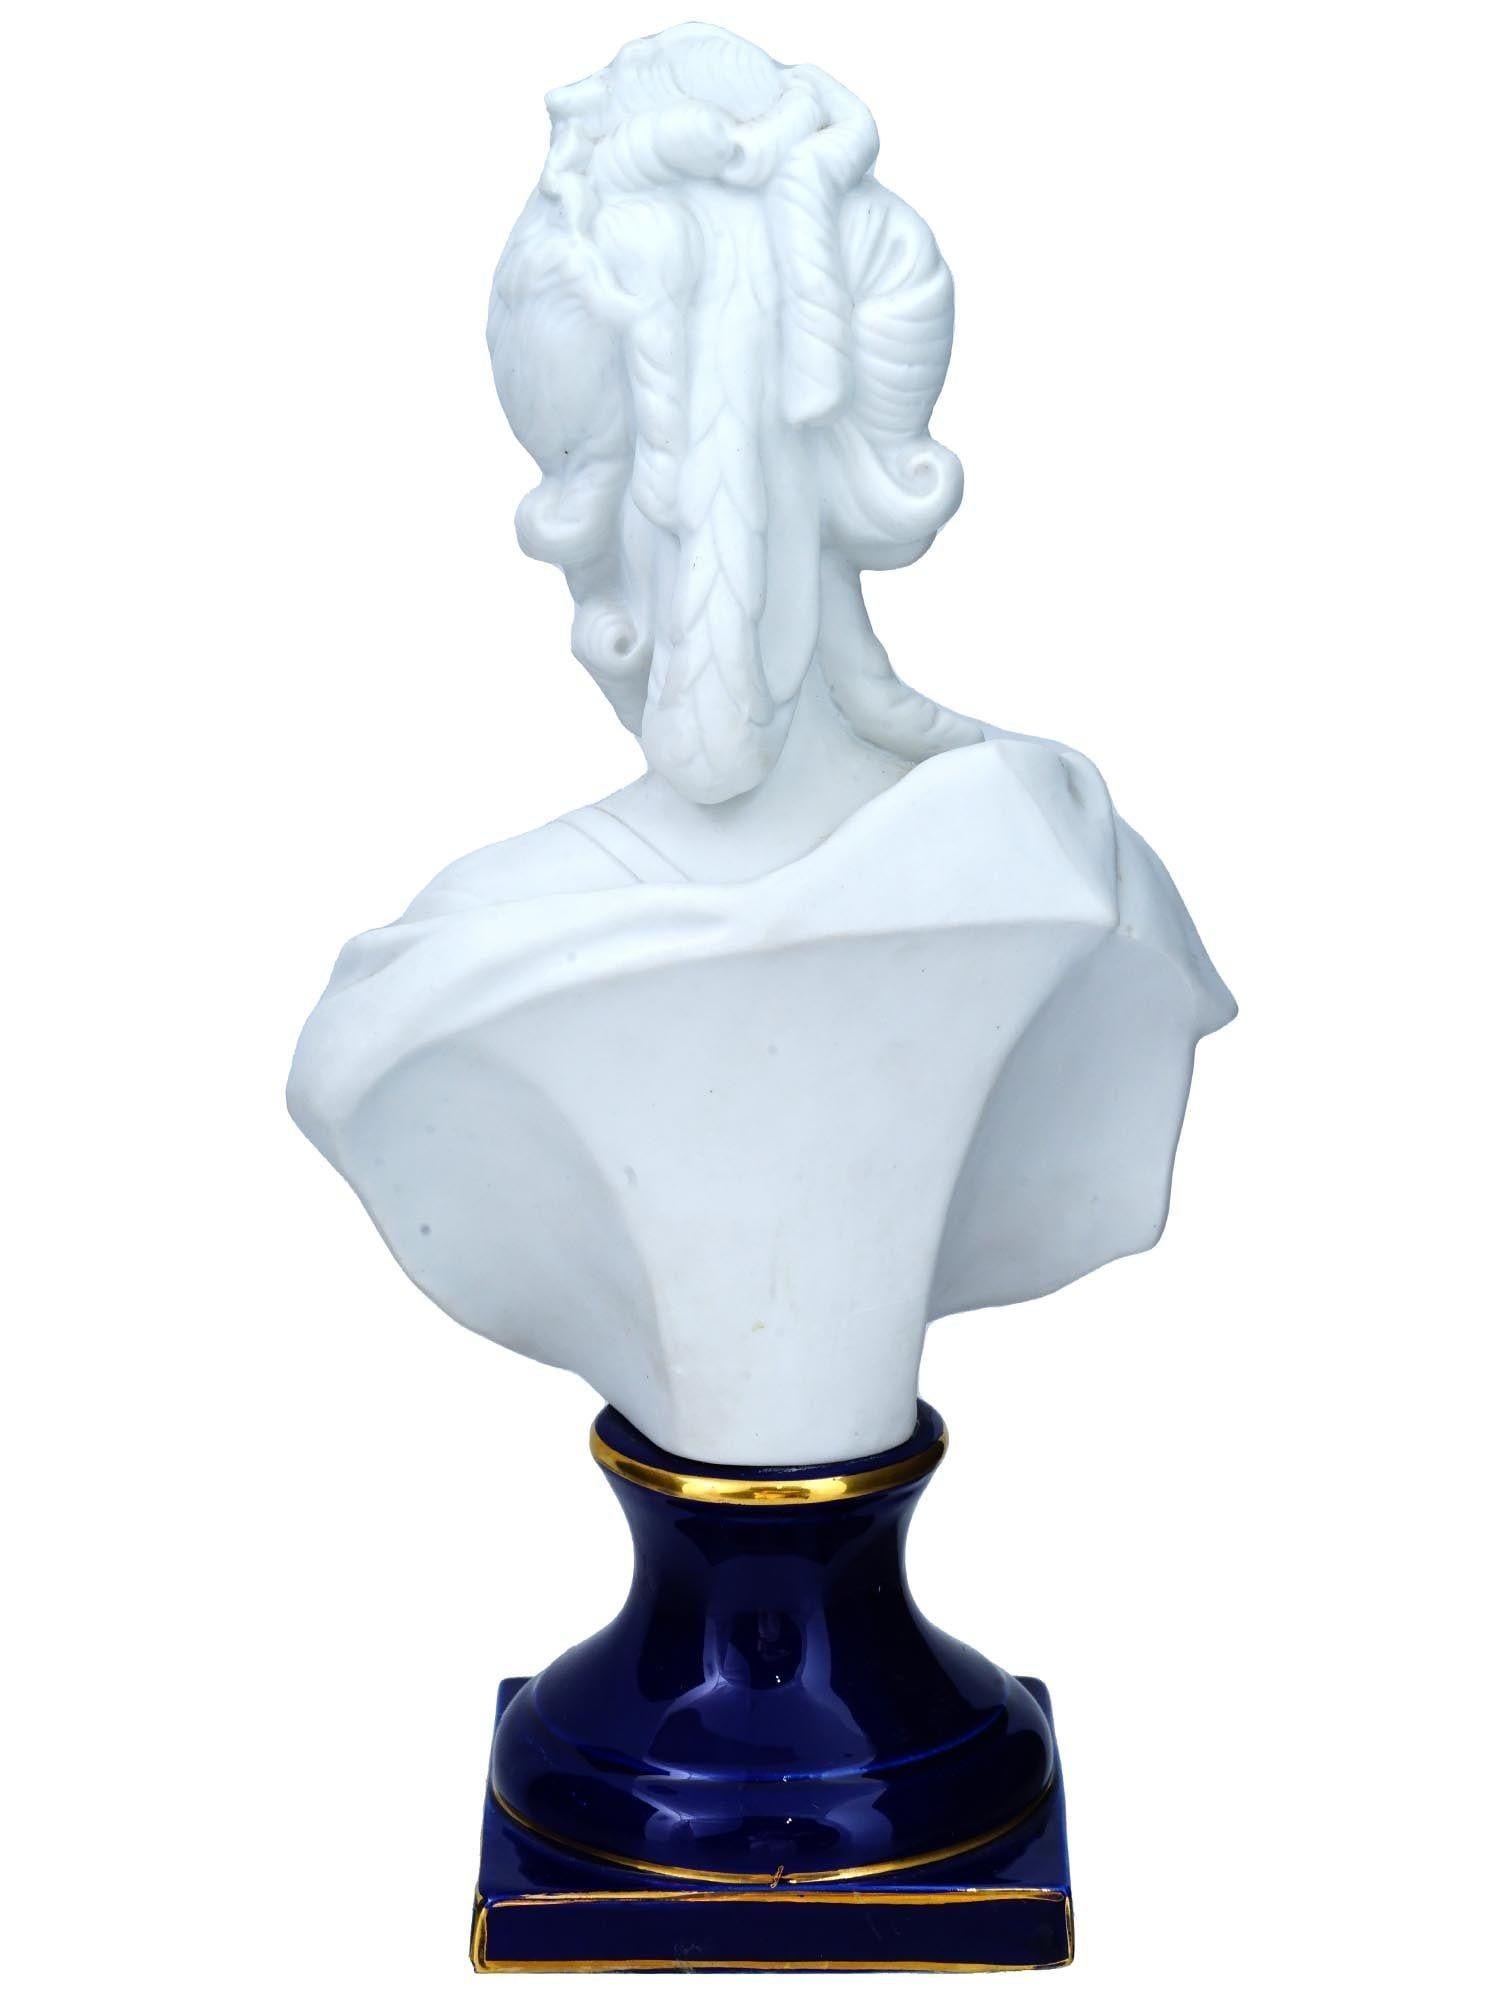 Antique continental bisque porcelain bust of Marie Antoinette in the French Sevres style with cobalt blue glazed finish and gilded accents.  Unsigned and in good condition.